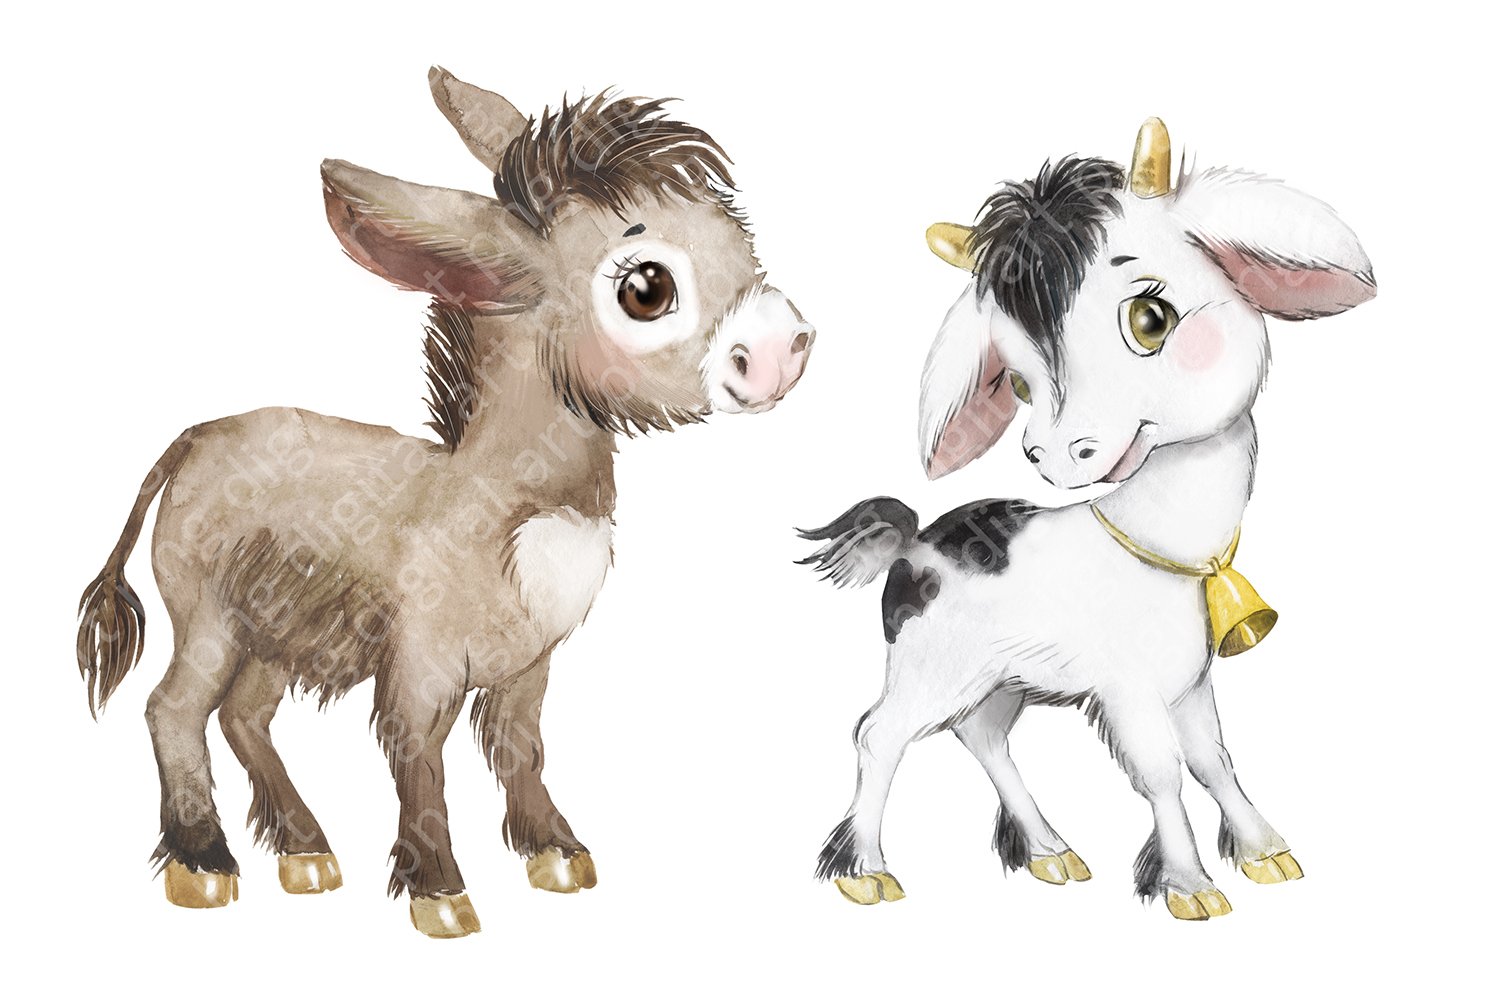 Two cute farm animals for your illustration.